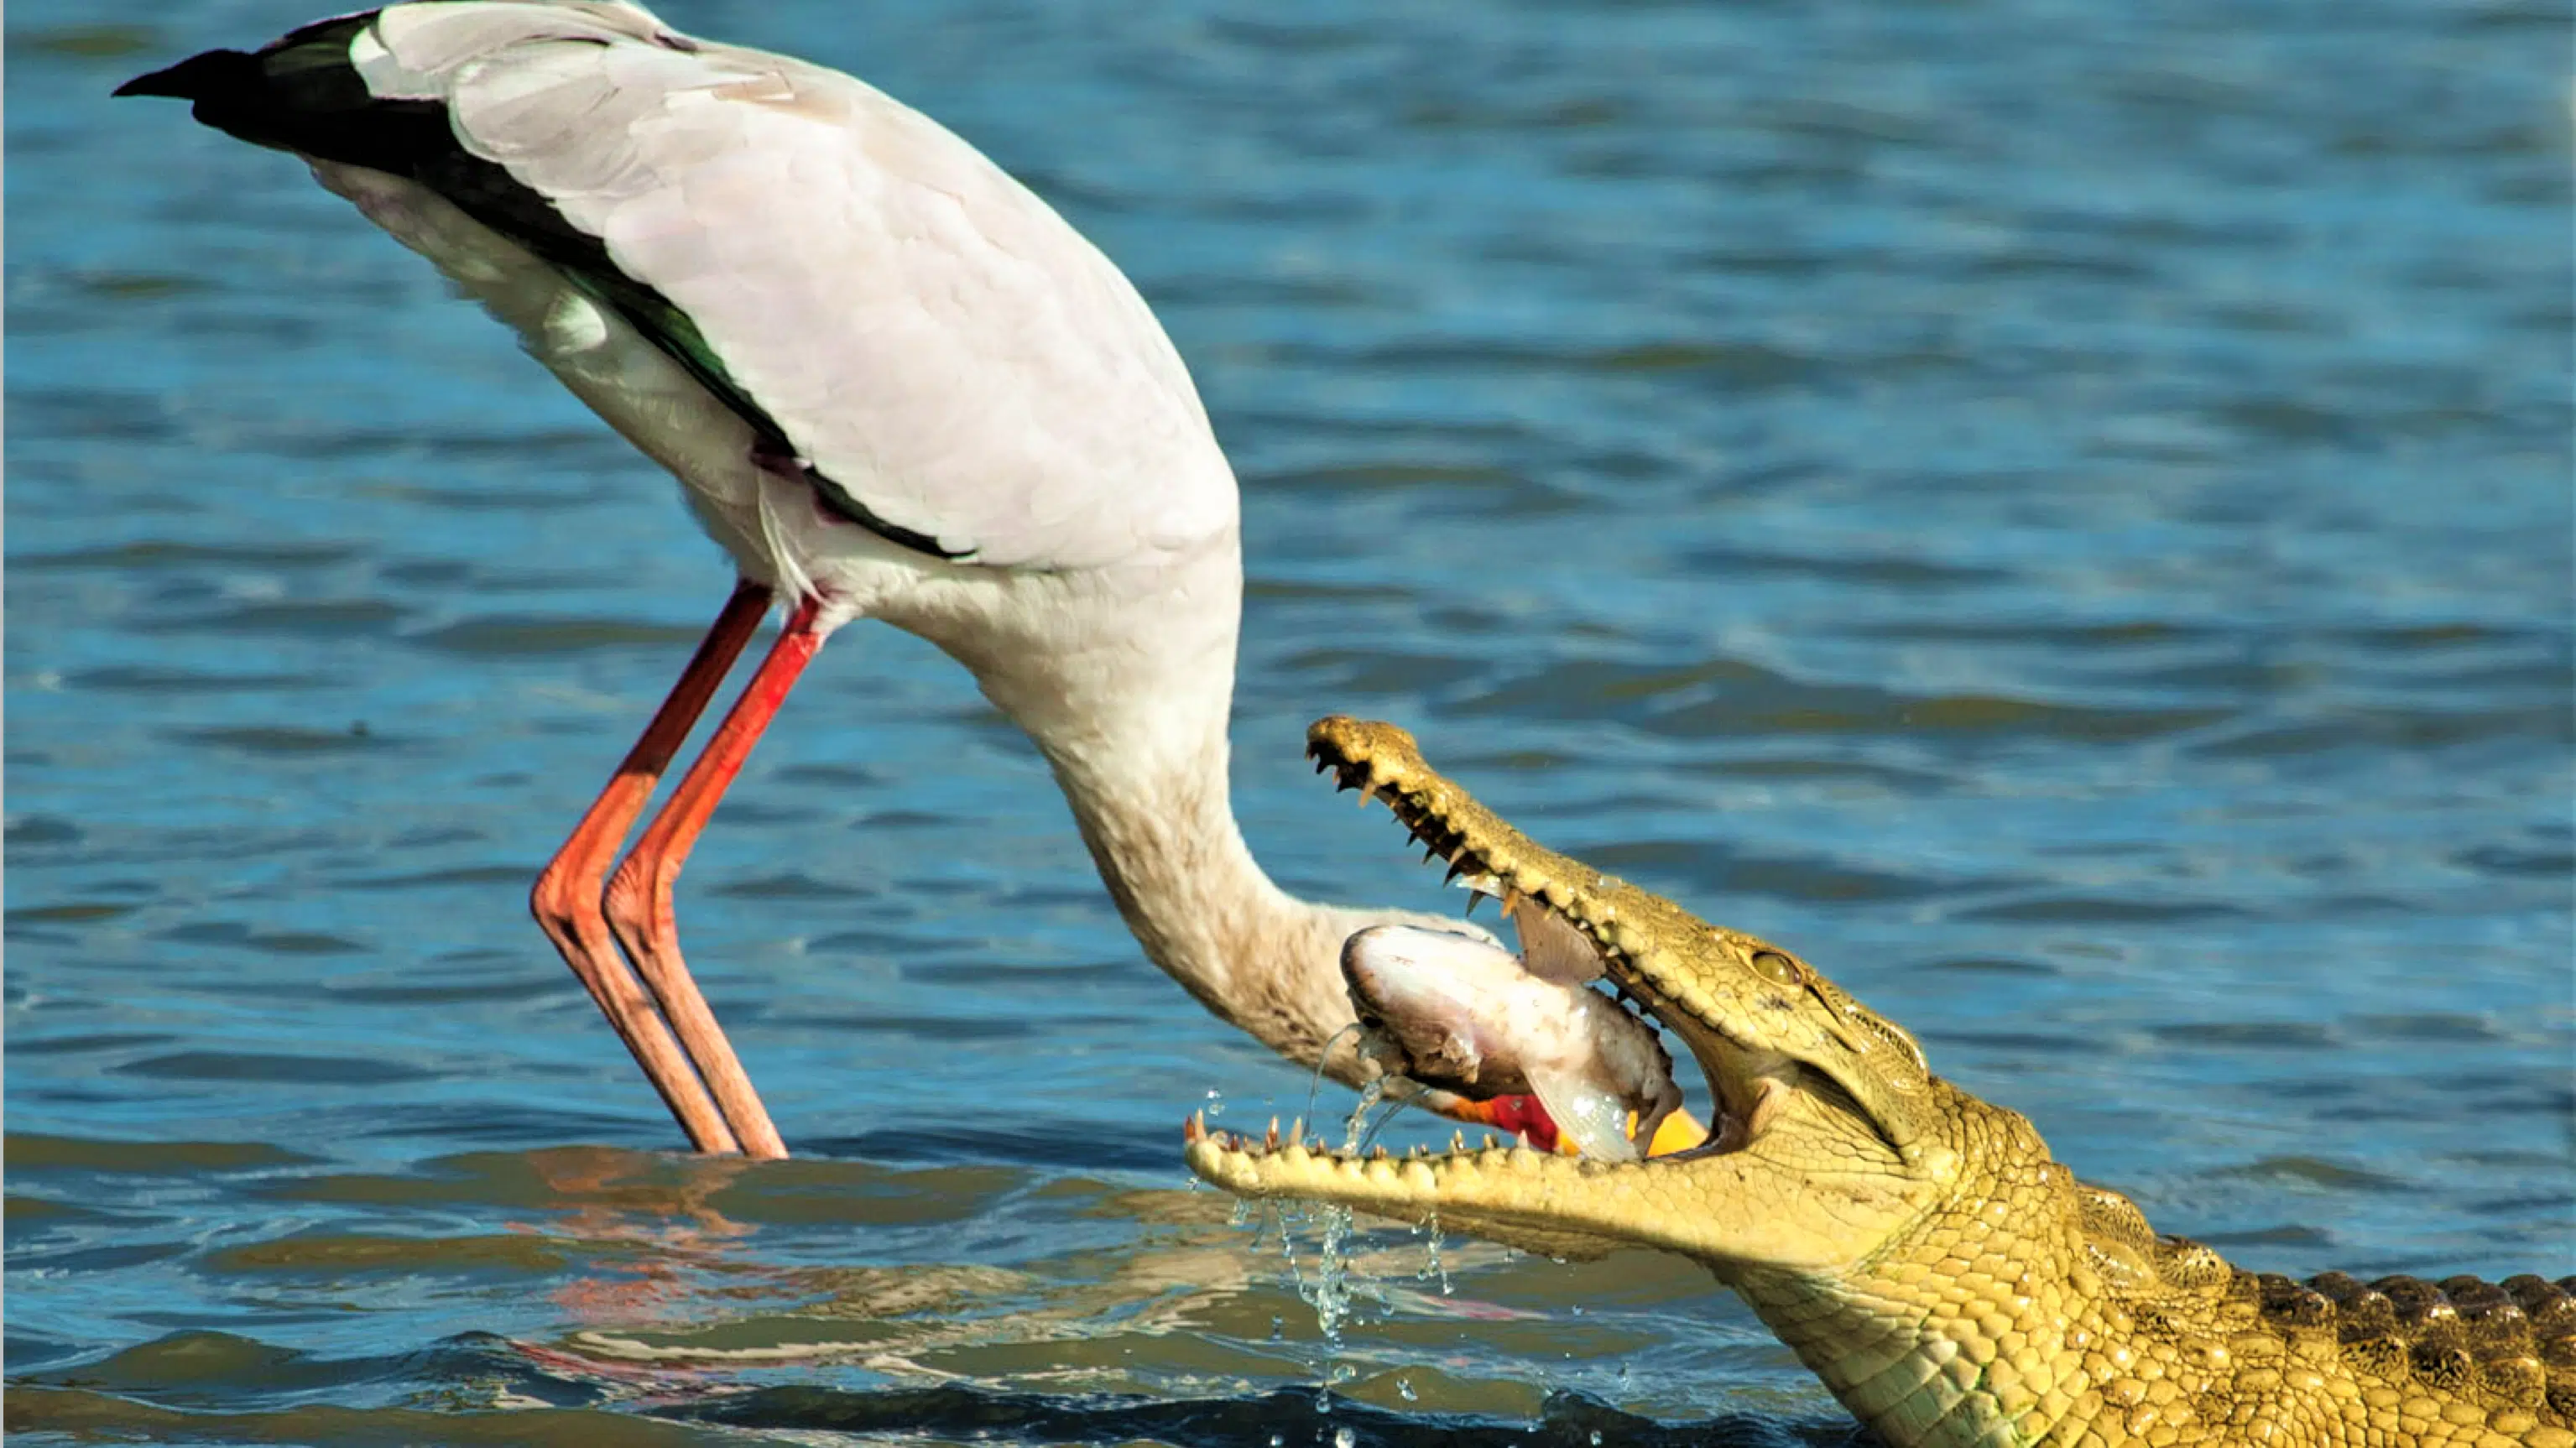 Stork Sticks its Head in the Mouth of a Crocodile to get Meal Back